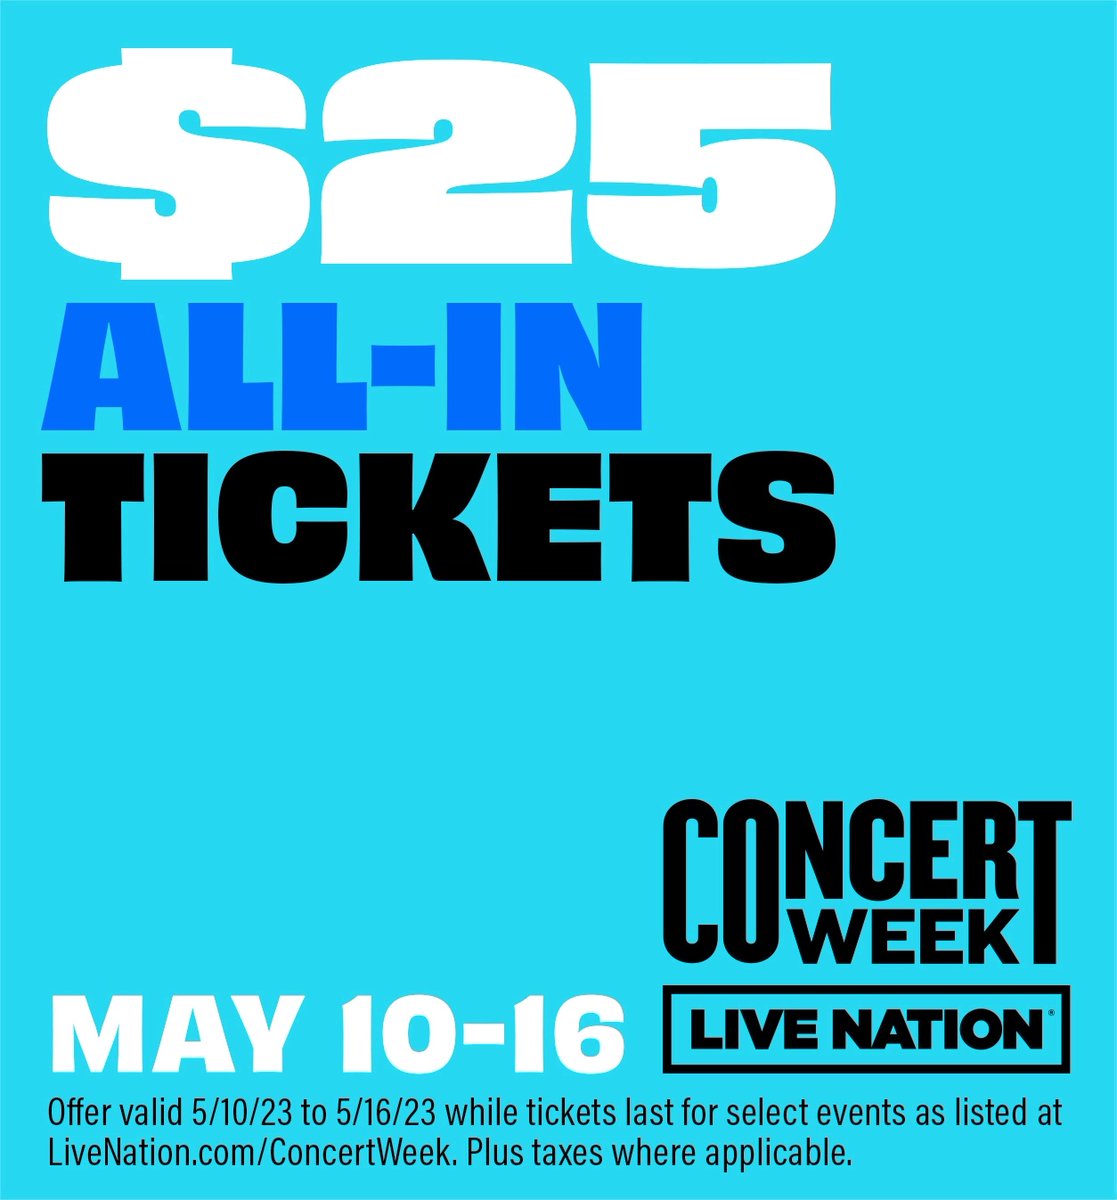 .@LiveNation’s #ConcertWeek is here!

Get your $25 tickets - all in - for these Cardinals shows - while you can! 🌹

Get'em here 👇
ryanadams.ffm.to/livenationconc…